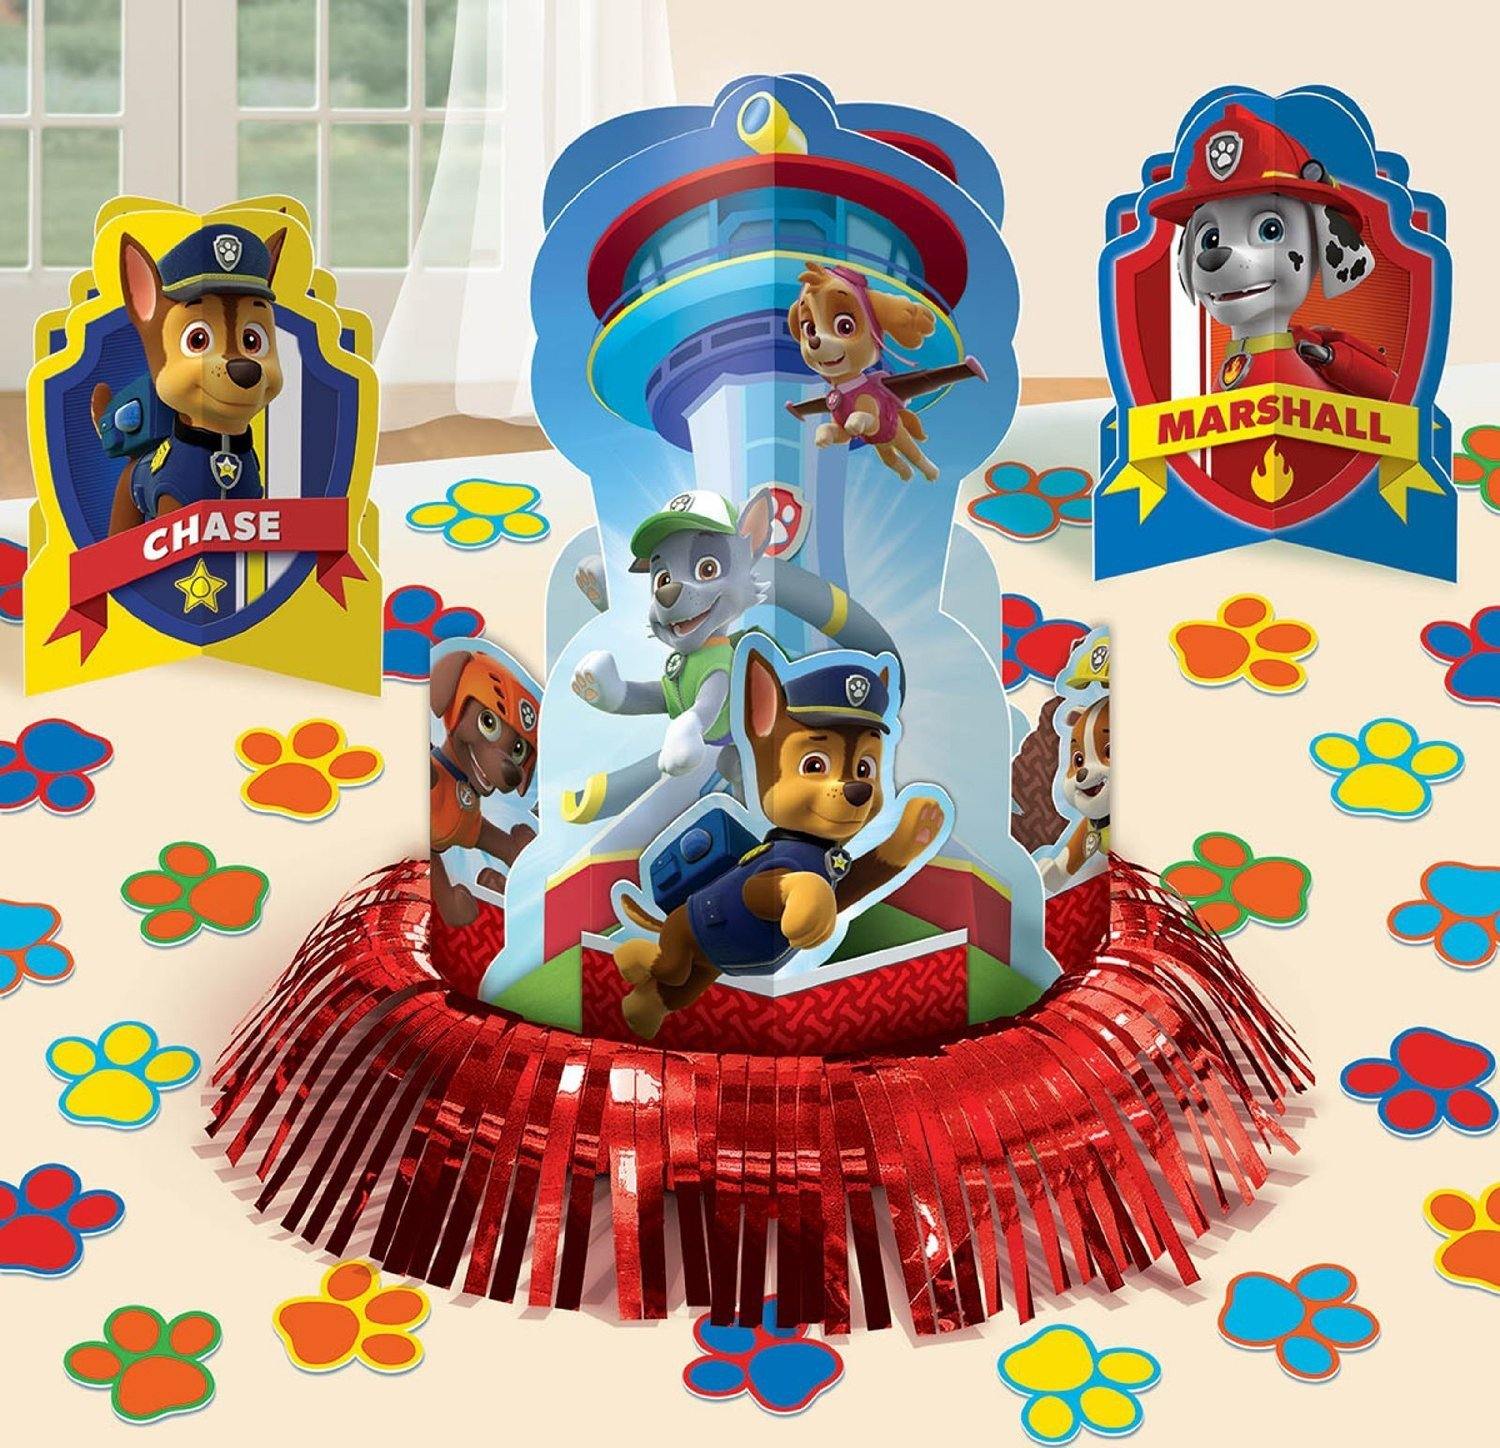 Paw Patrol Table Decorating Kit Contains - 1 x 32cm Centrepiece - 2 x 18cm Centrepieces - 20 x 5cm Confetti - The Base Warehouse